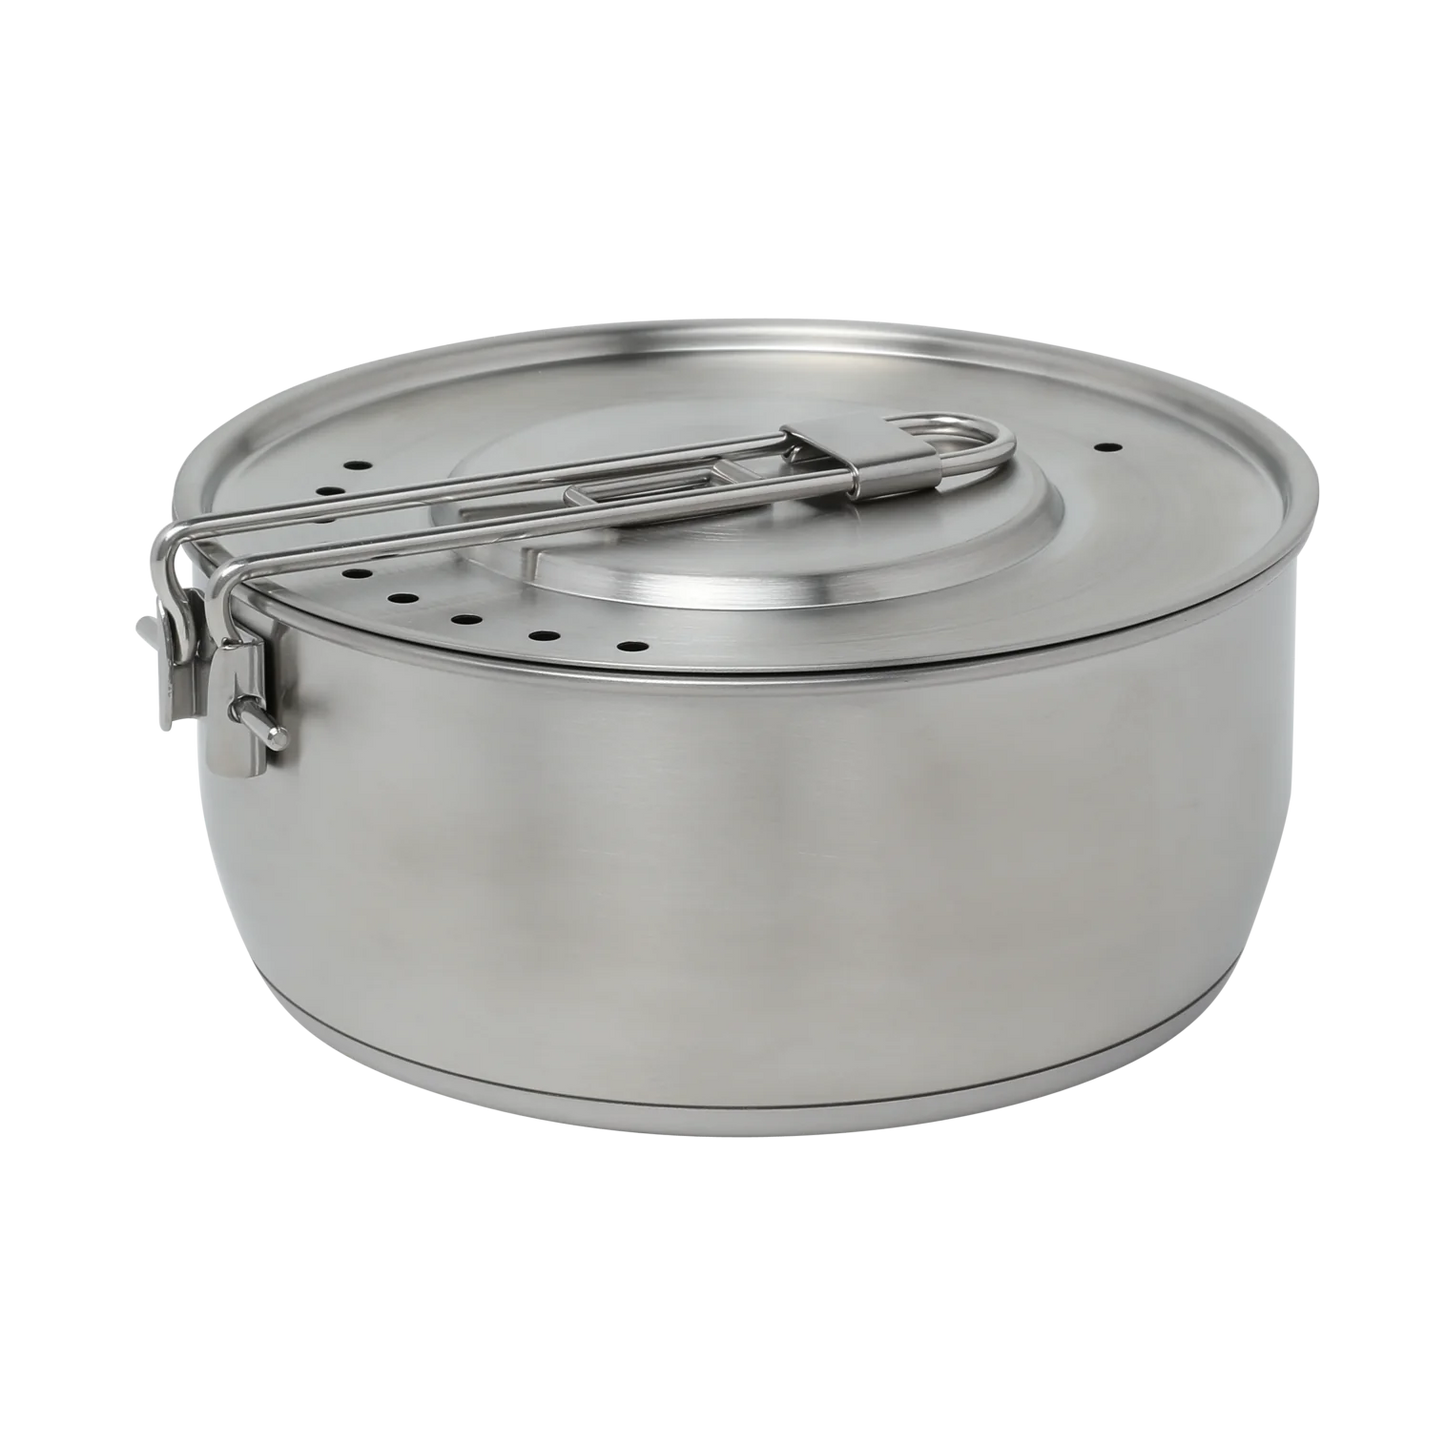 Stanley The Even Heat Essential Stainless Steel Pot Set 10-10650